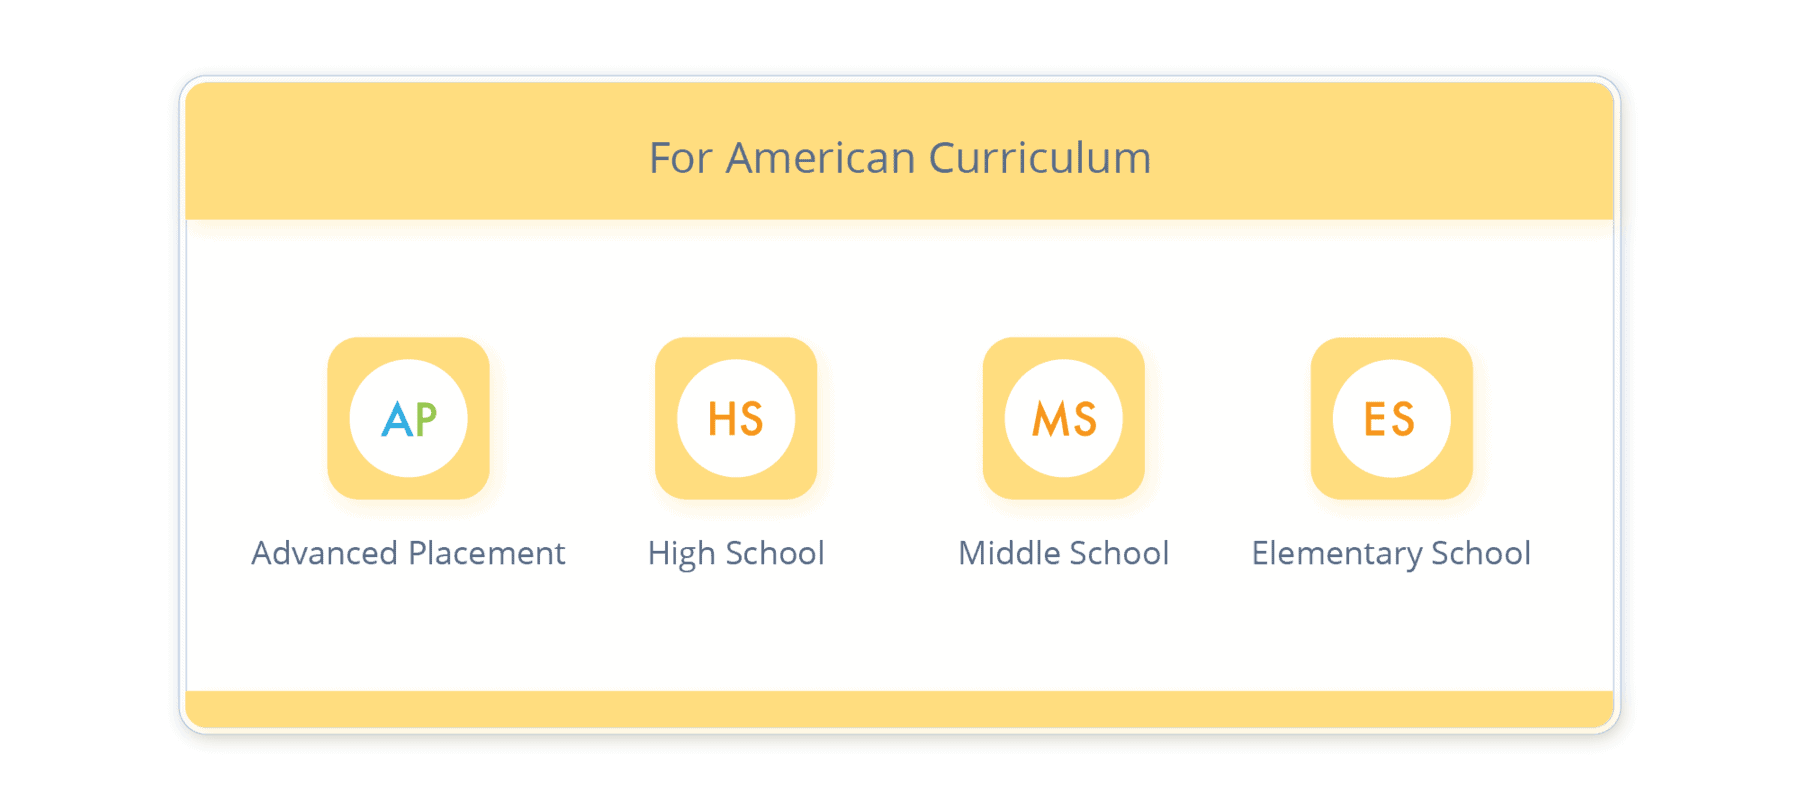 Support for the American Curriculum from Elementary School to Advanced Placement